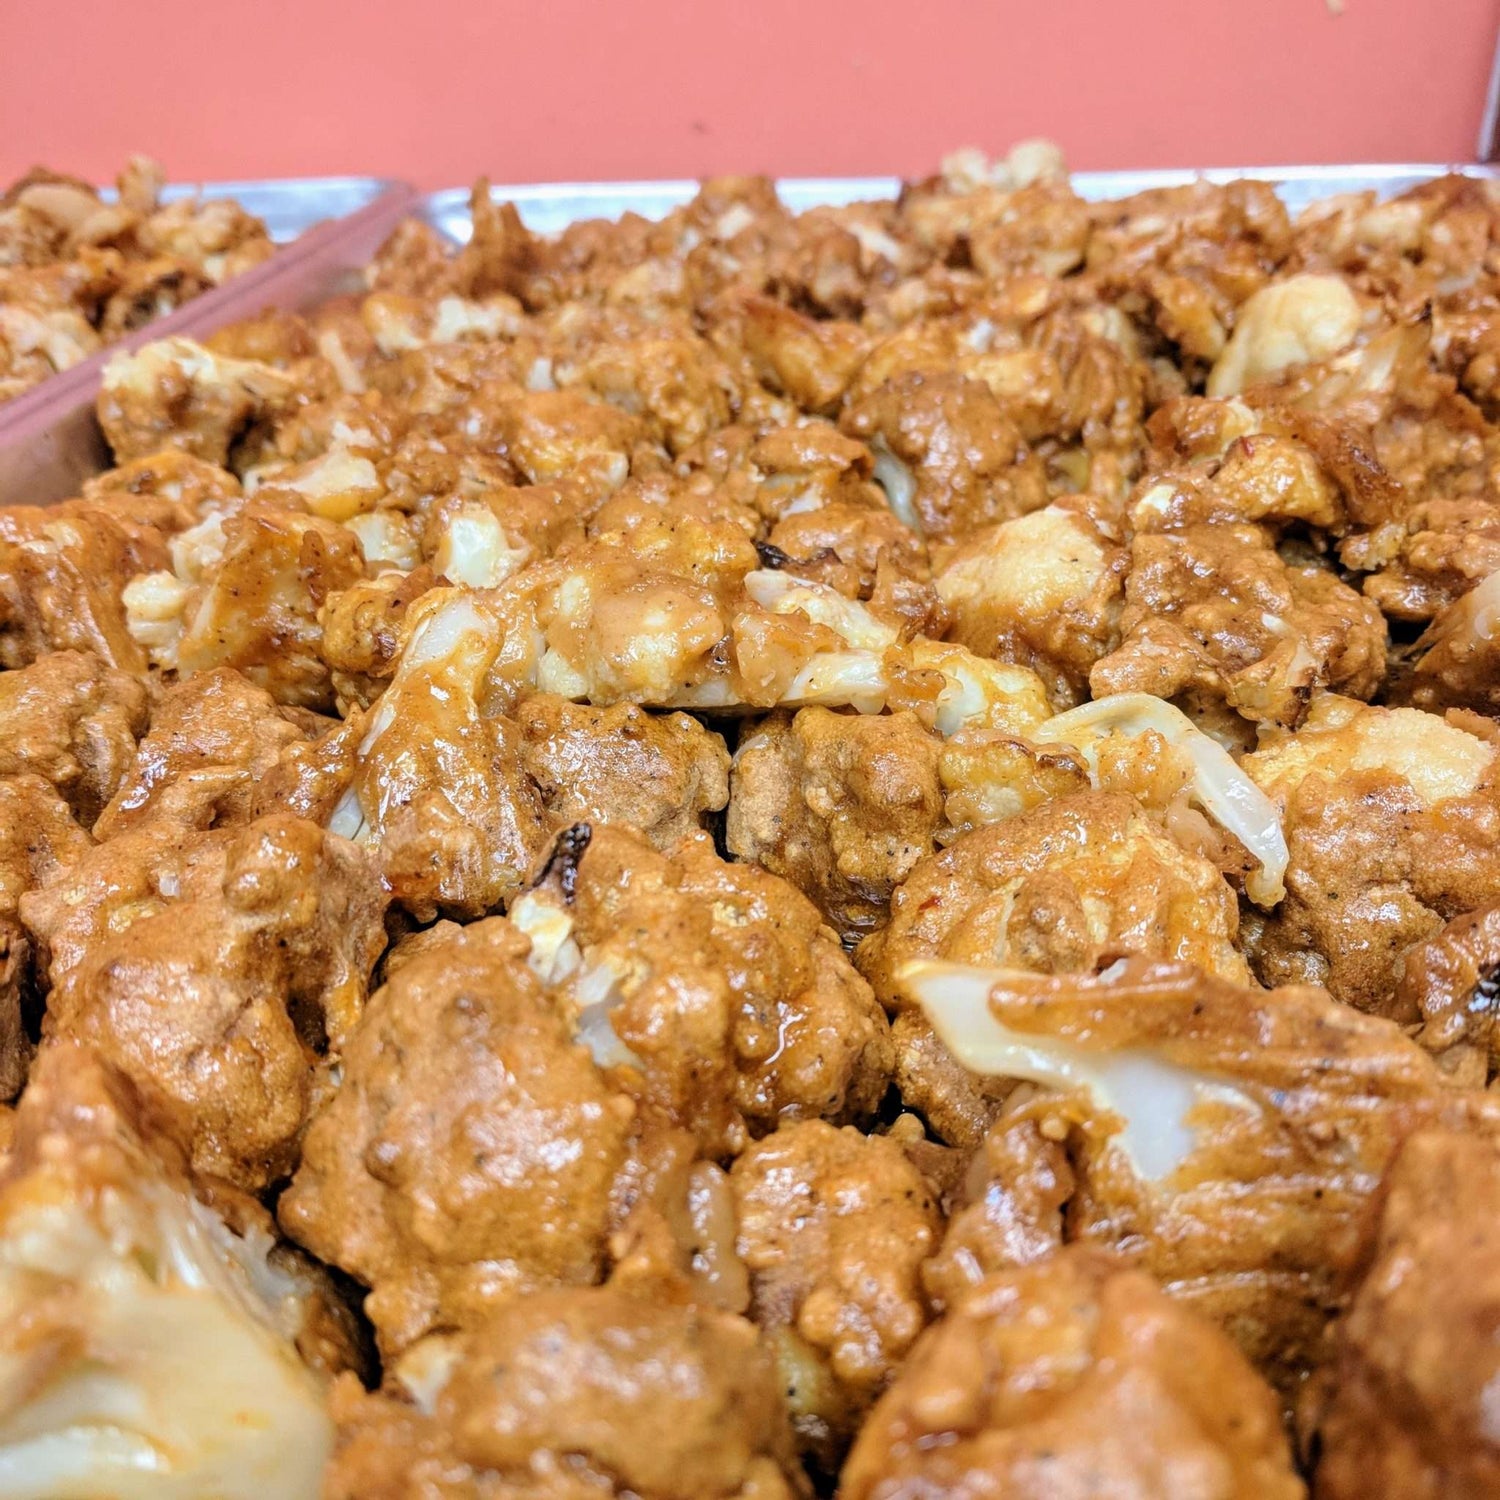 Order our Mango Habanero Cauliflower Wingz for dinner or your next event. 1 Half-tray of wings serves 6-8